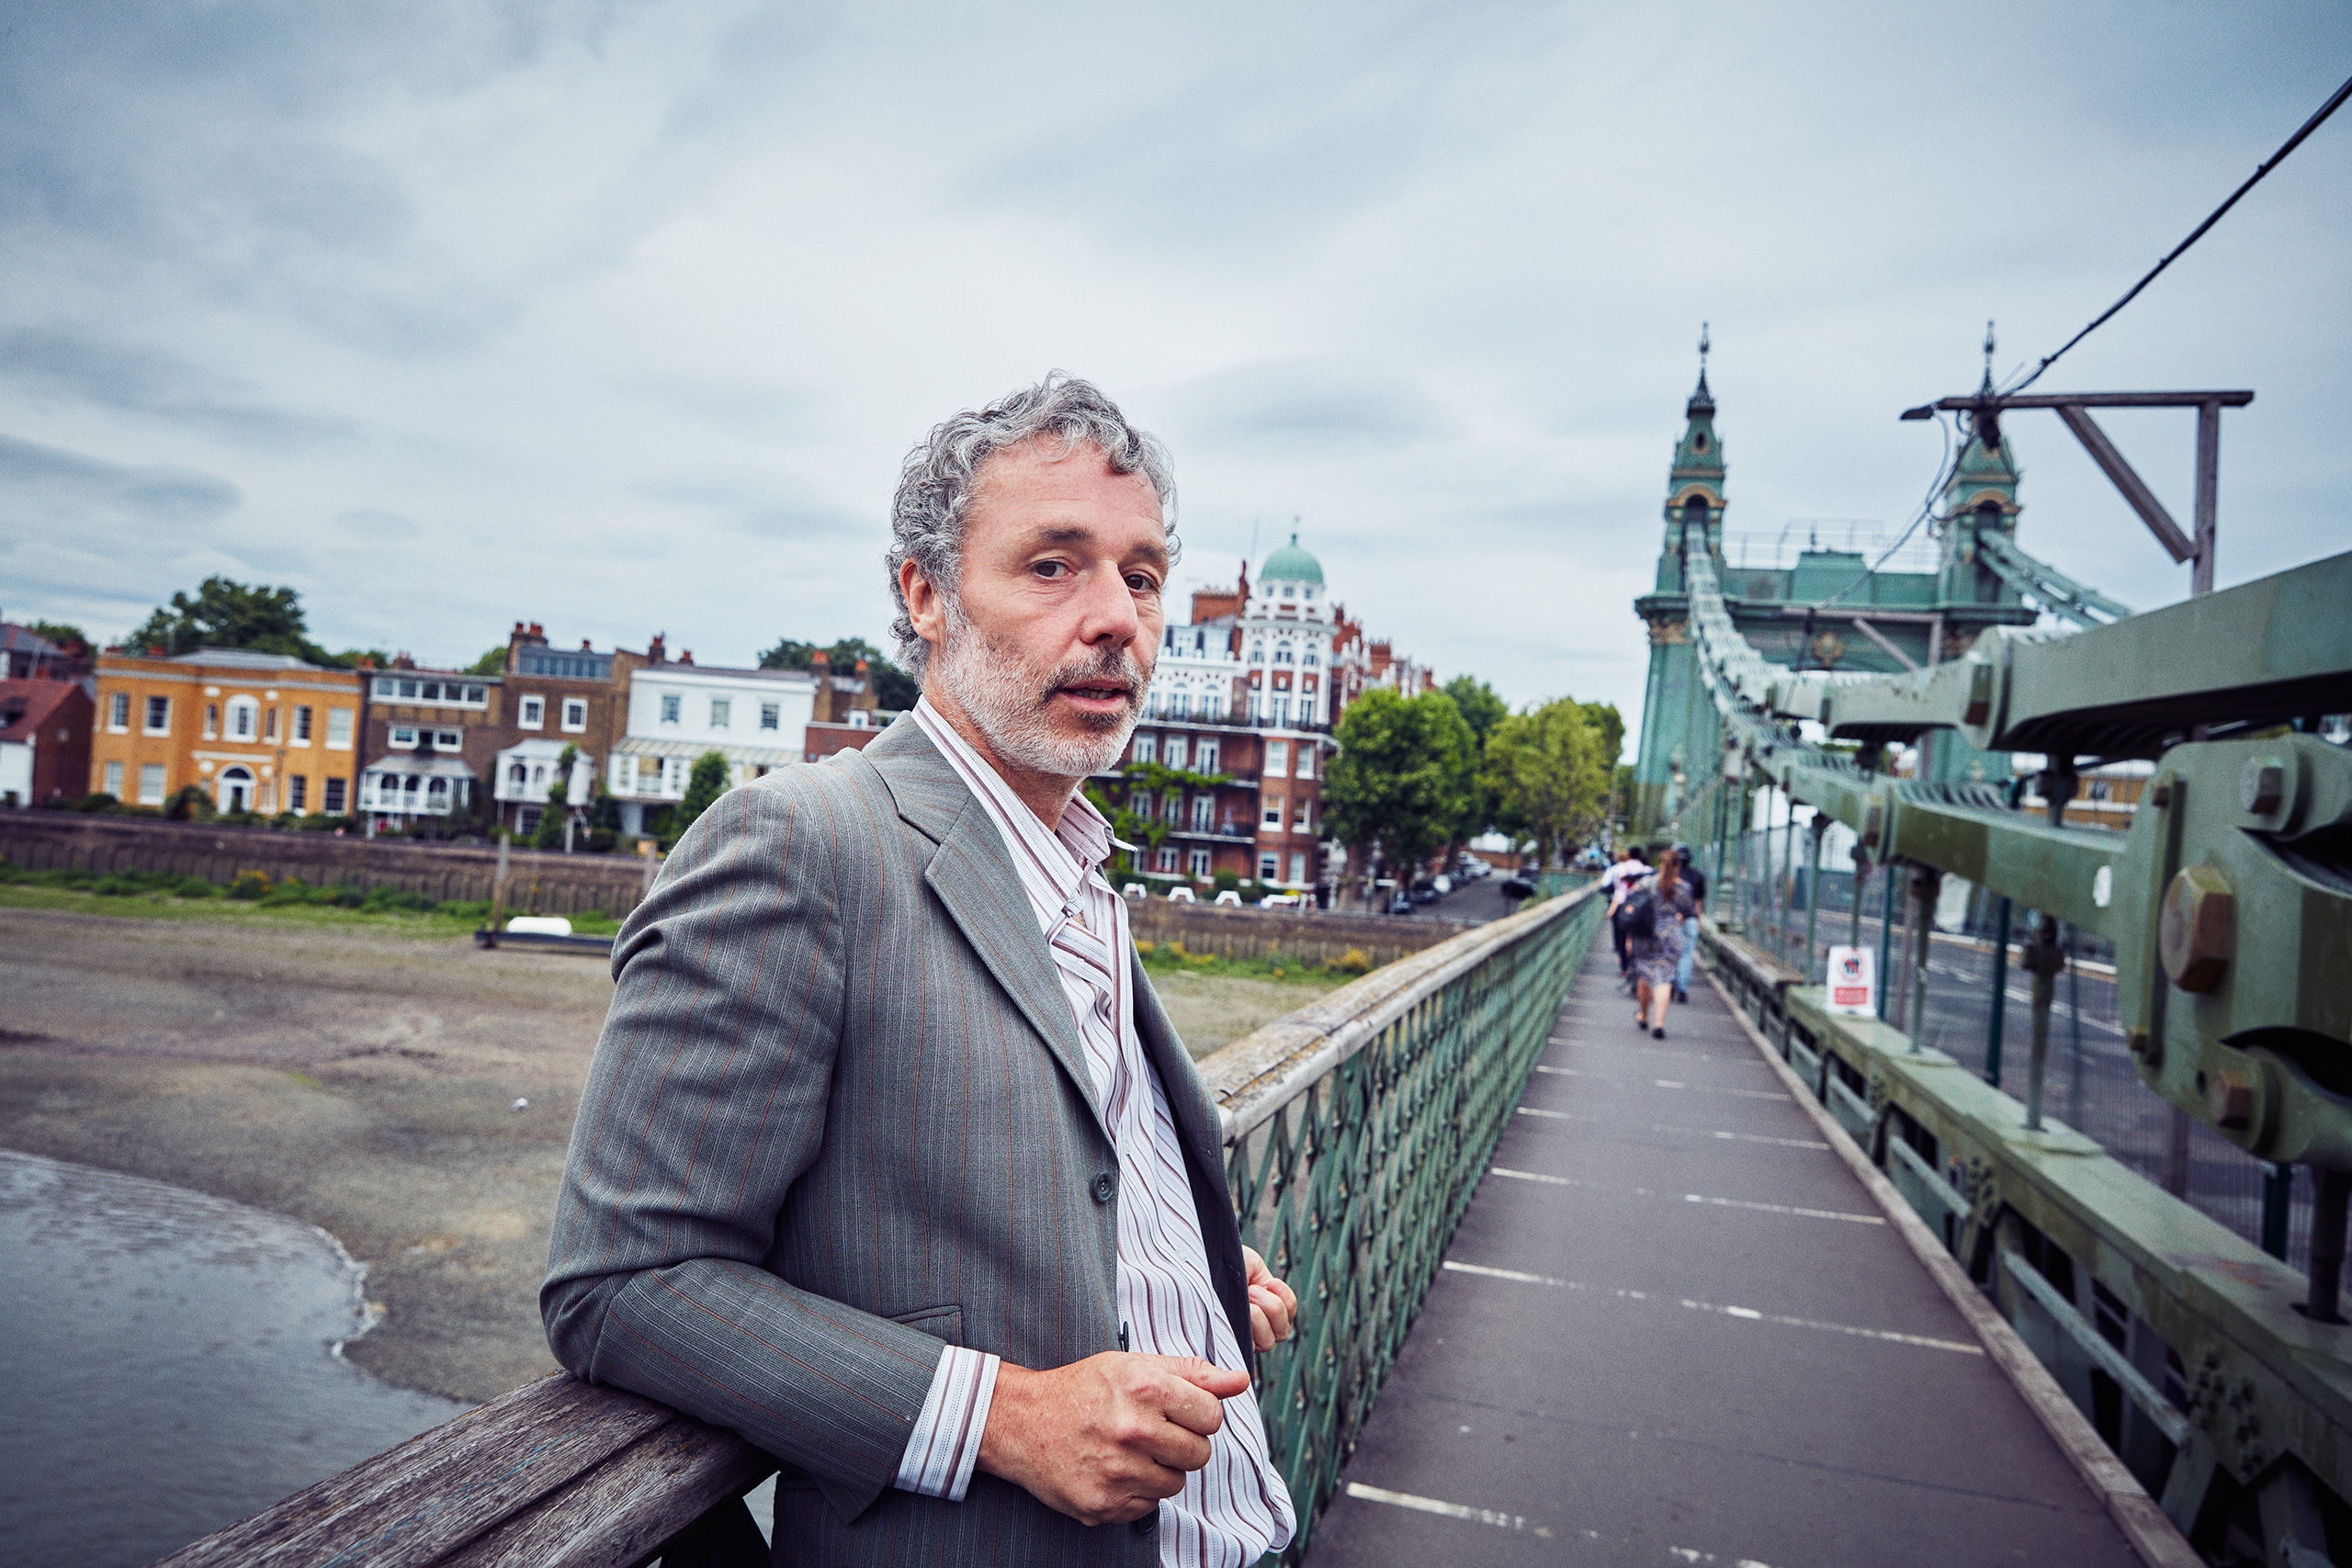 Baxter Dury leans on the side of Hammersmith Bridge, London